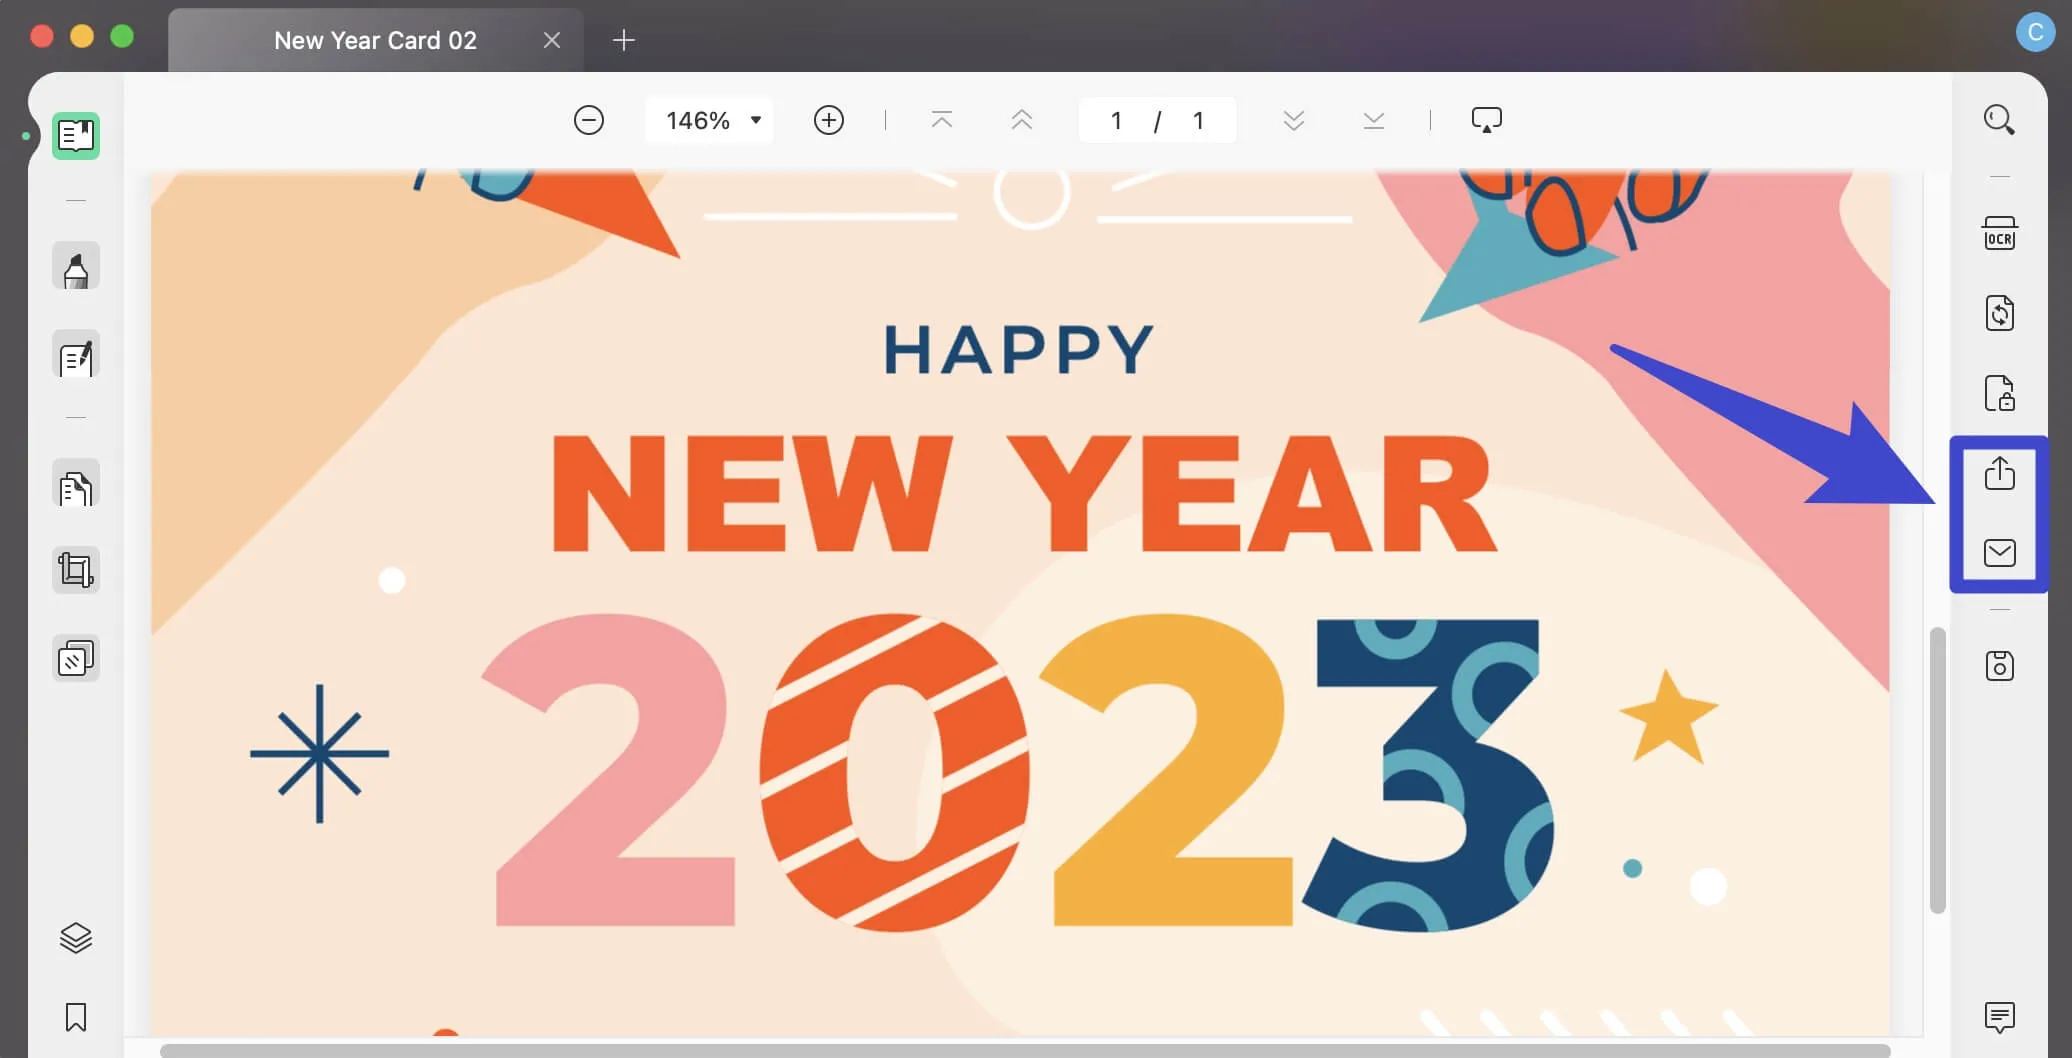 sahre the happy new year 2022 wishes card